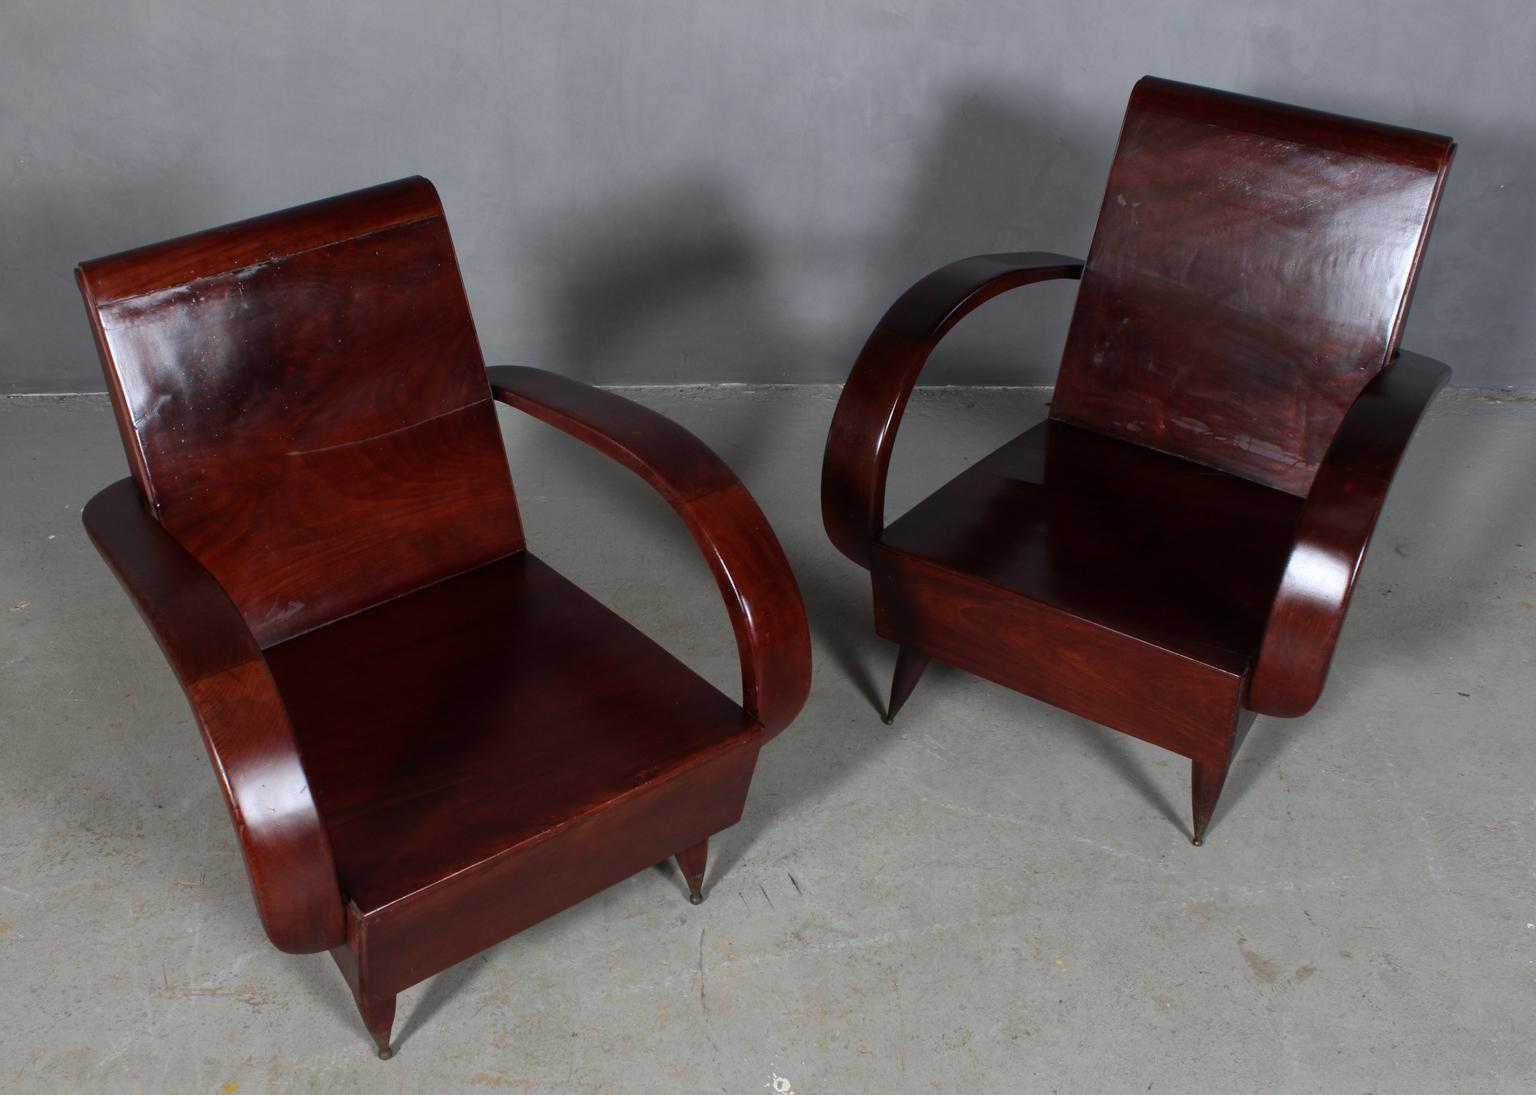 Pair of art deco lounge chairs made in partly solid exotic hard wood.

Curvy armrests.

Legs with brass details.

Made in the second half of the 20th century.

Minor height differences. Can be accompanied by a cushion for extra support in